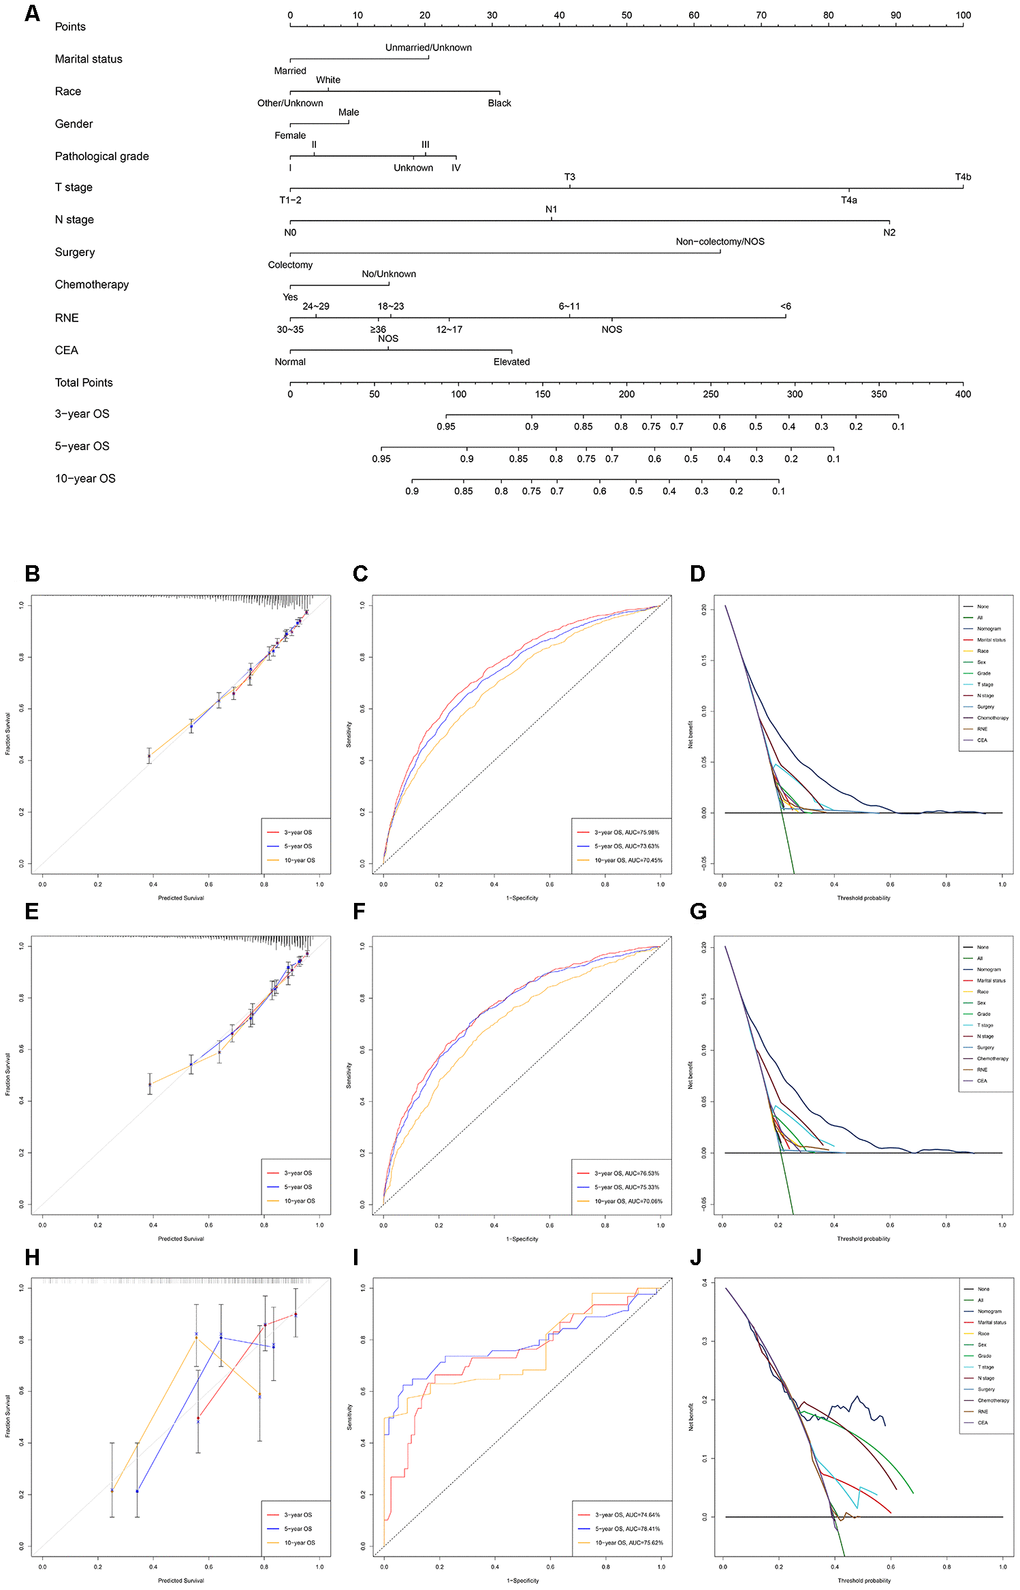 Development and verification of the nomogram predicting OS. (A) The nomogram of predicting OS for patients with EOLACC. (B) The calibration curves predicting OS in the training group. (C) The time-dependent ROC curves of nomogram predicting OS in the training group. (D) The decision curve analysis of the nomogram and all prognostic factors for OS in the training cohort. (E) The calibration curves predicting OS in the verification group. (F) The time-dependent ROC curves of nomogram predicting OS in the verification group. (G) The decision curve analysis of the nomogram and all prognostic factors for OS in the verification. (H) The calibration curves predicting OS in the external verification group. (I) The time-dependent ROC curves of nomogram predicting OS in the external verification group. (J) The decision curve analysis of the nomogram and all prognostic factors for OS in the external verification.